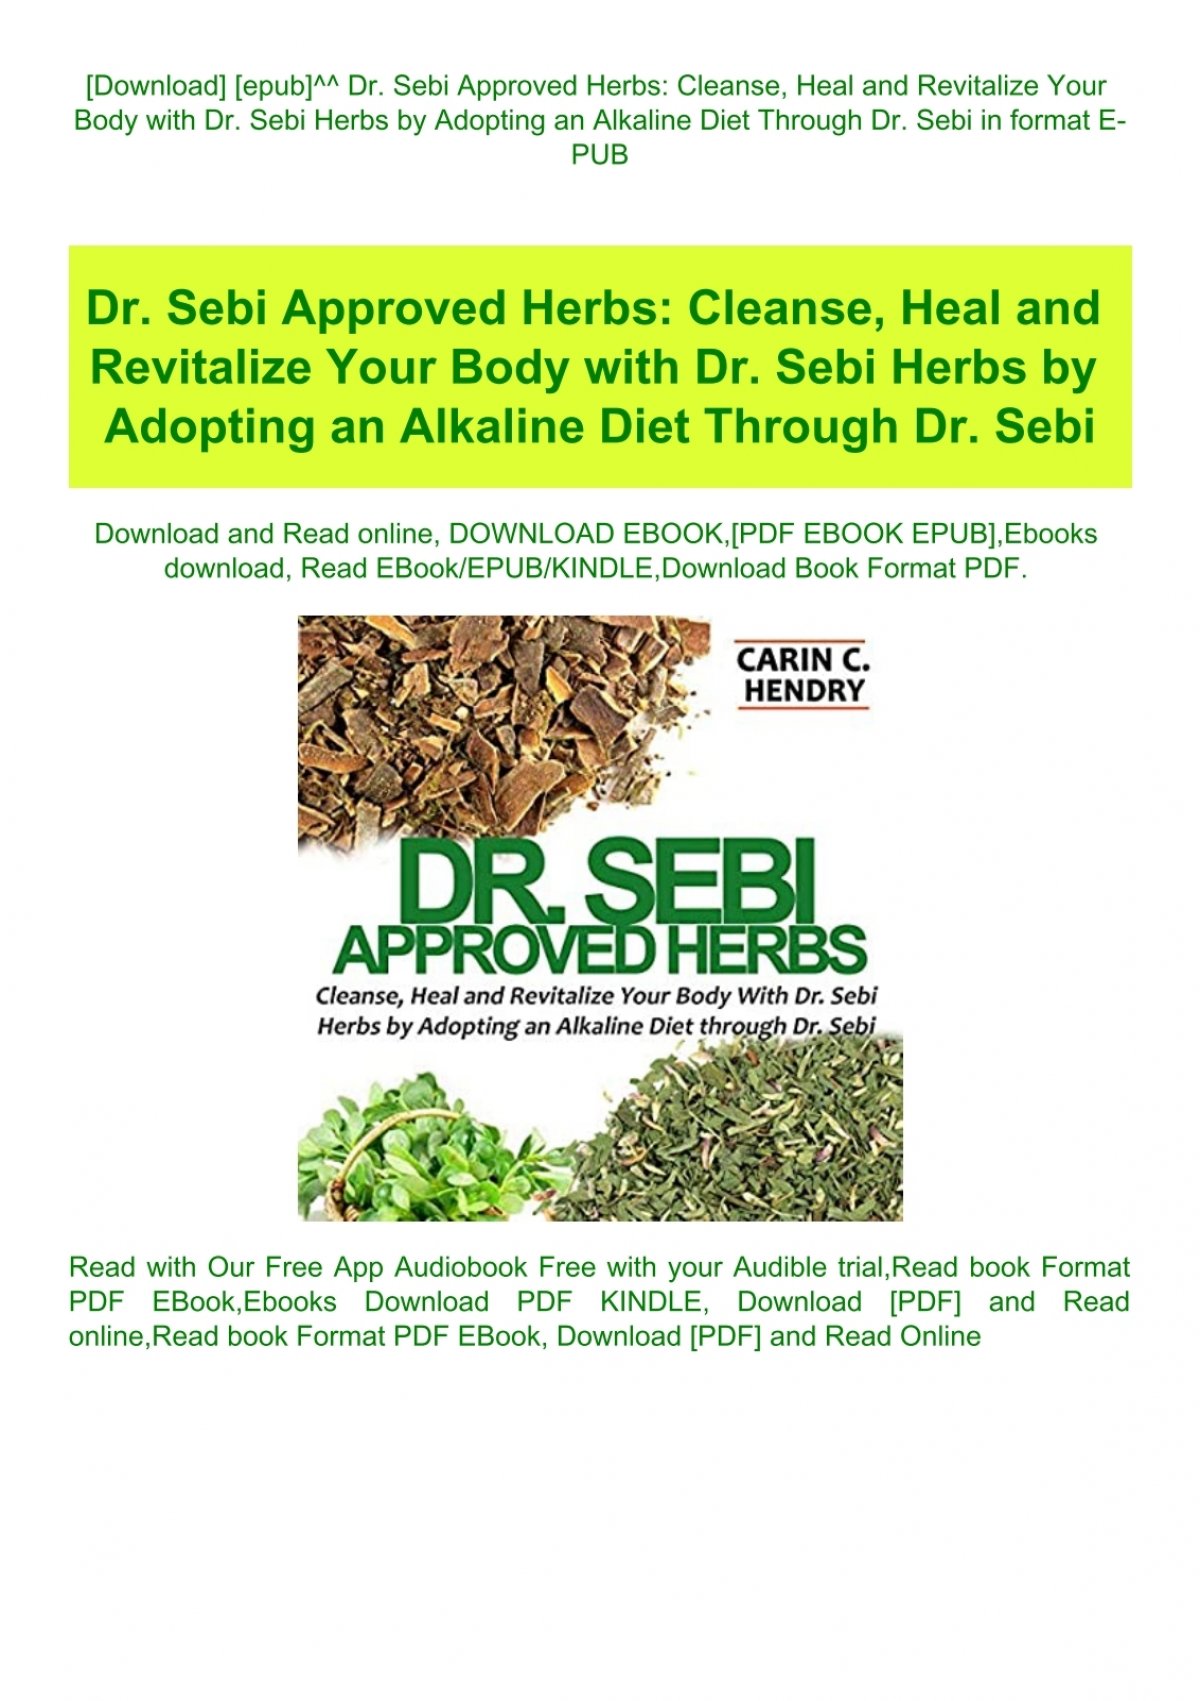 Download Epub Dr Sebi Approved Herbs Cleanse Heal And Revitalize Your Body With Dr Sebi